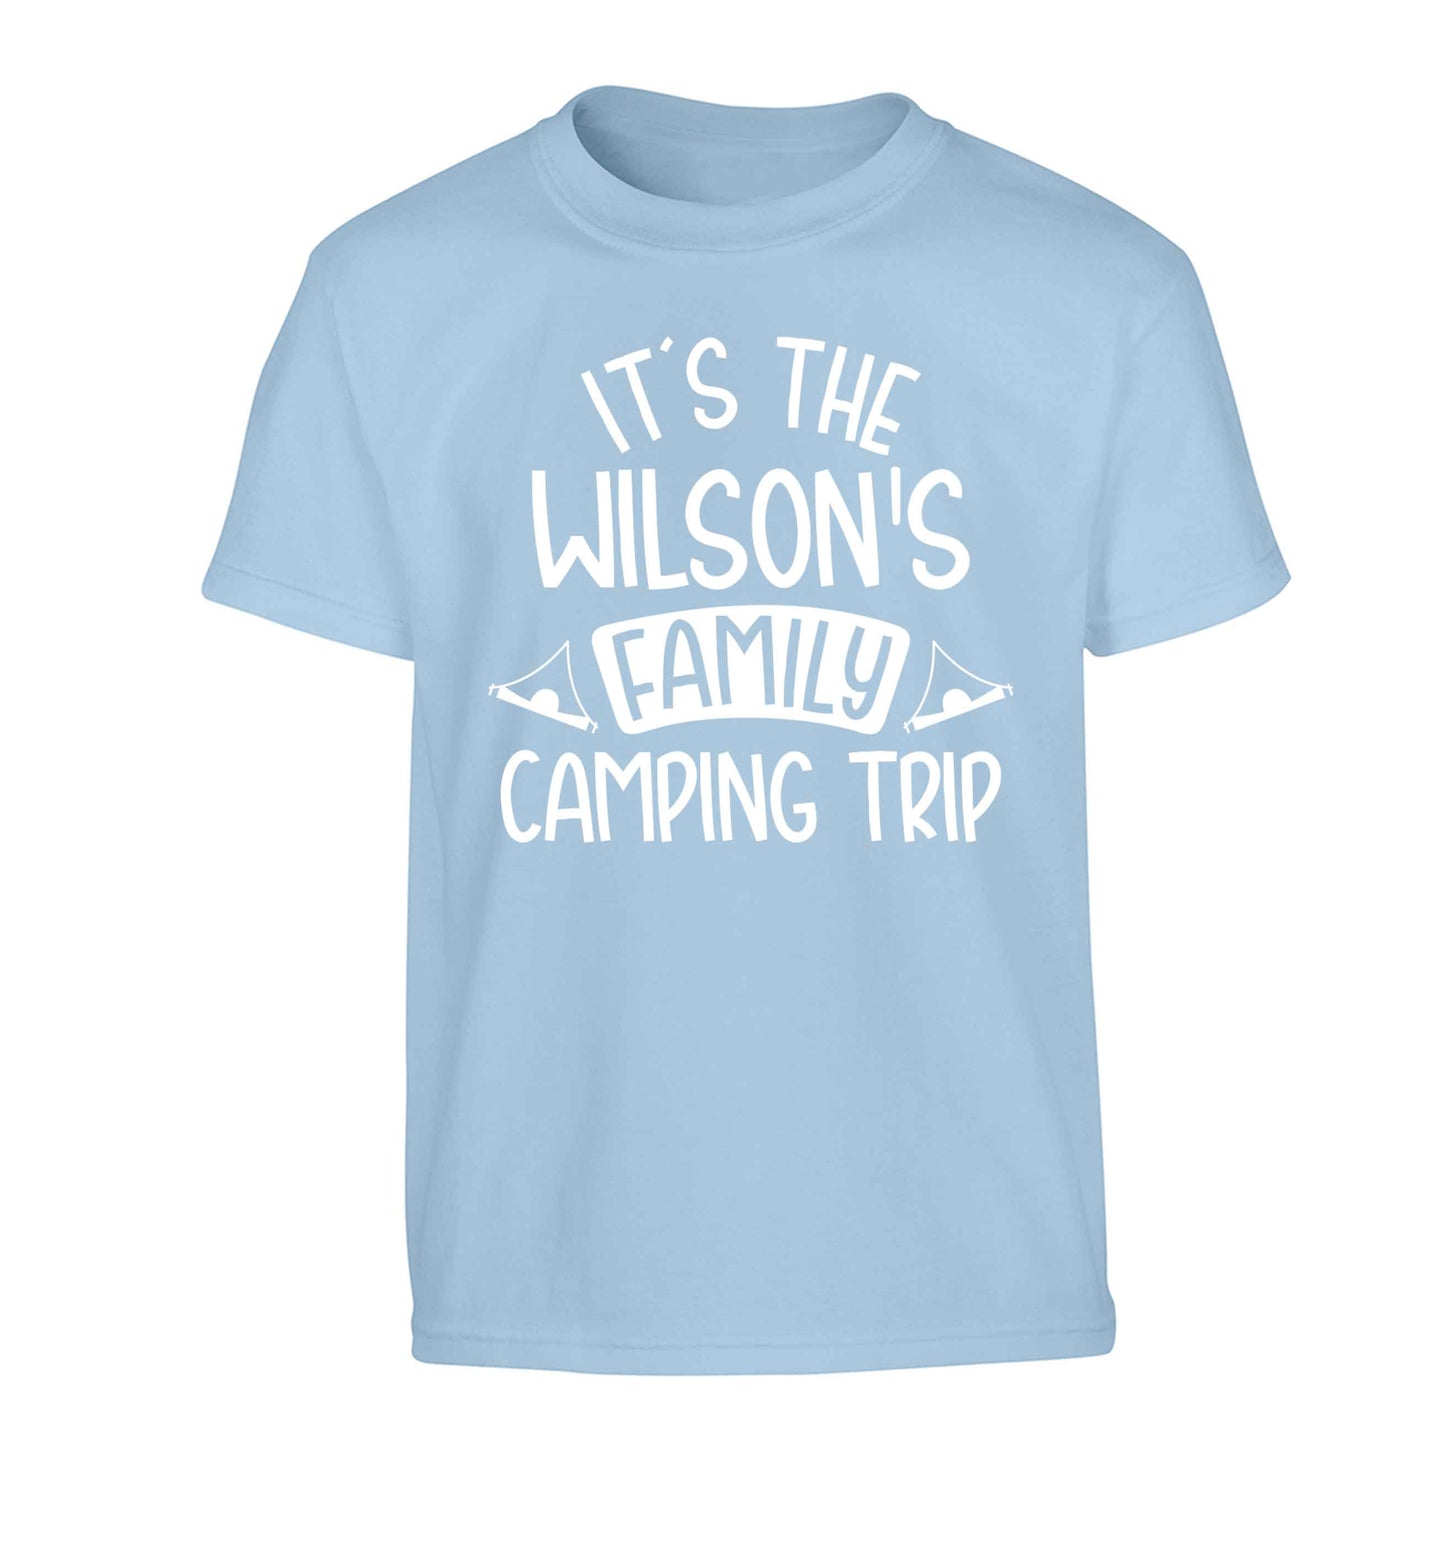 It's the Wilson's family camping trip personalised Children's light blue Tshirt 12-13 Years